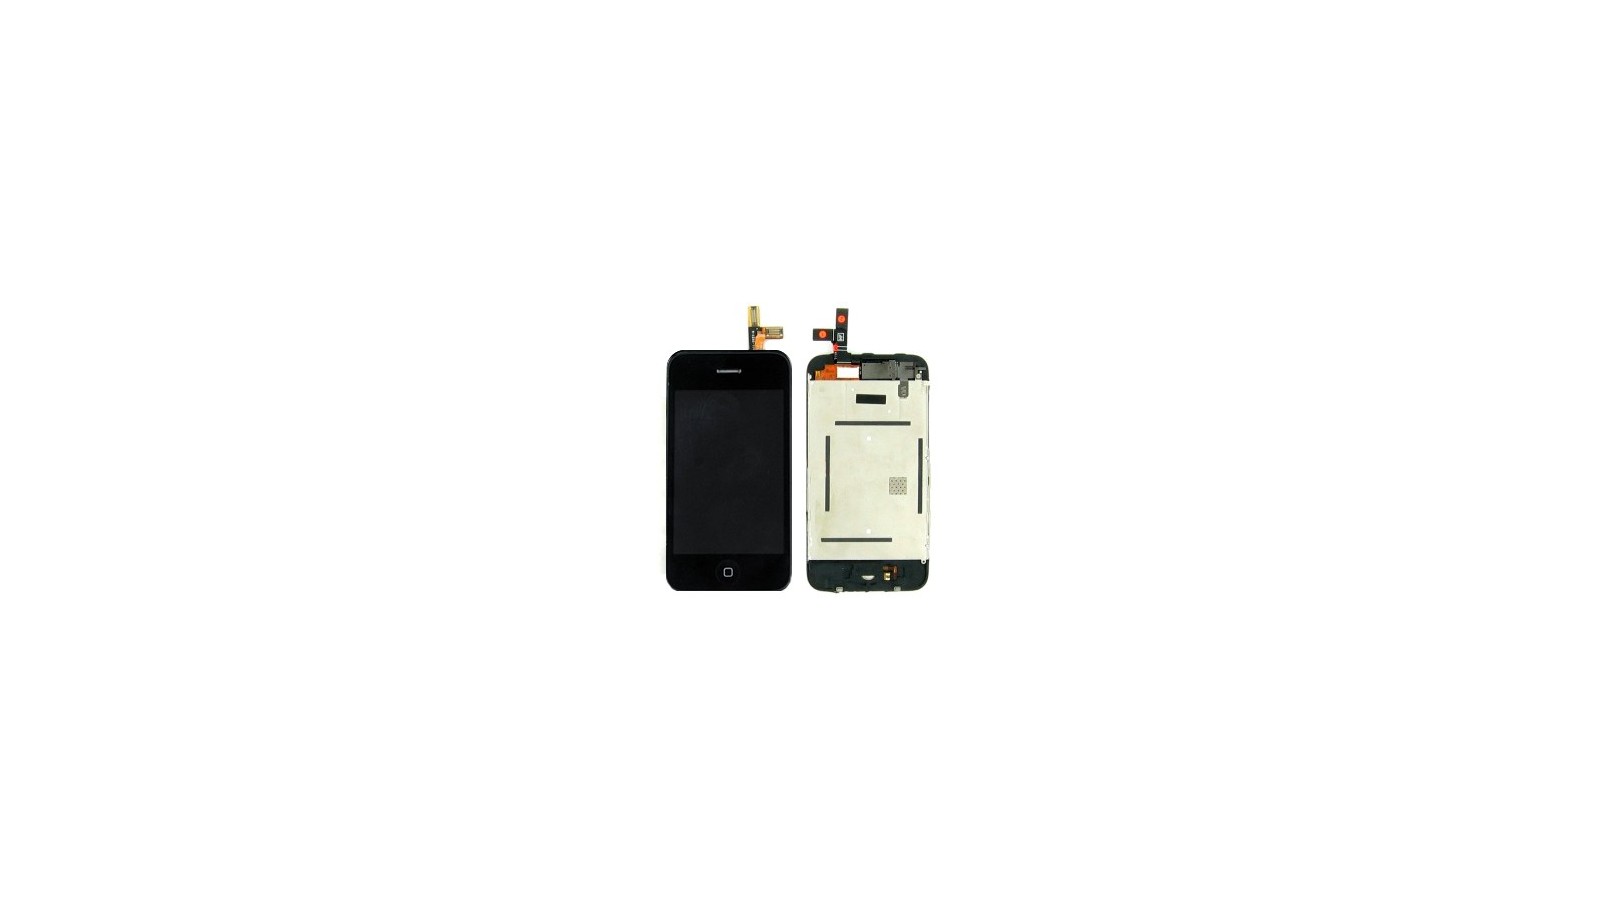 Kit Display Lcd completo di Touch screen e vetro Iphone 3G